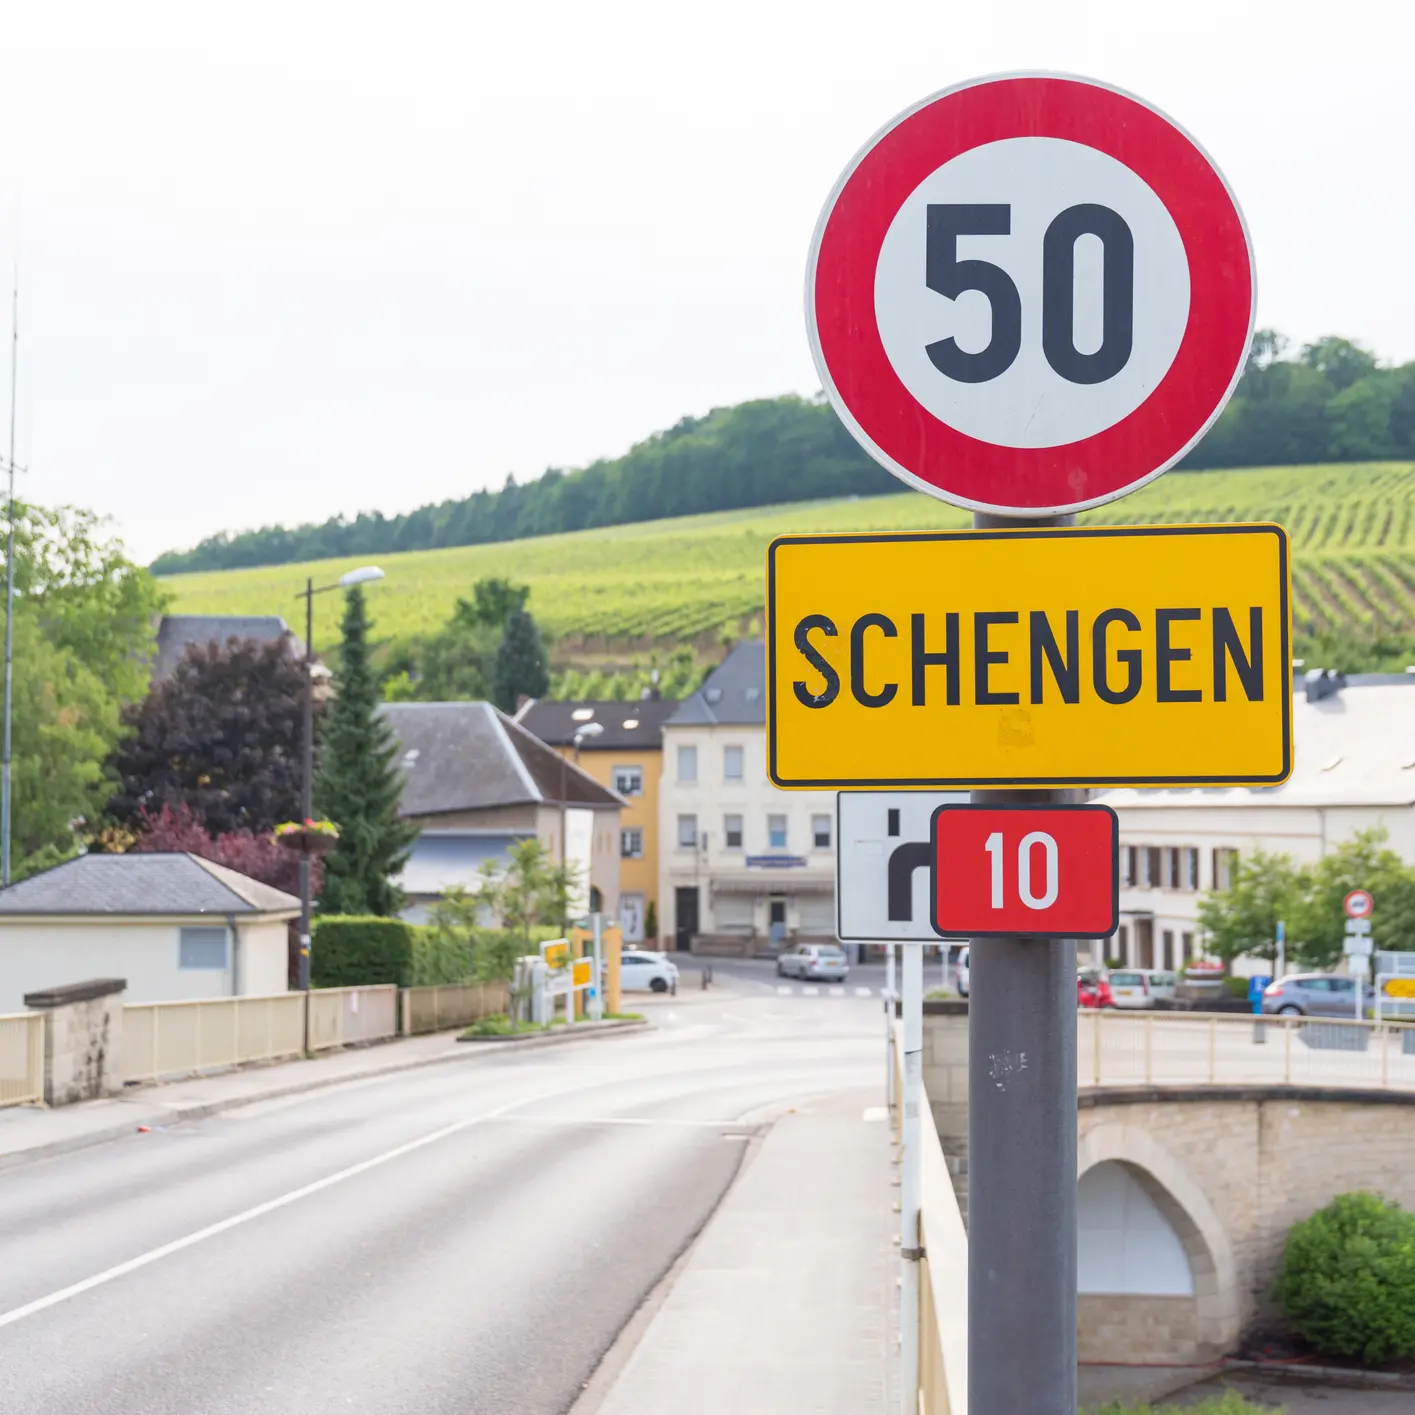 GCC holds talks with EU to secure visa-free travel to Schengen